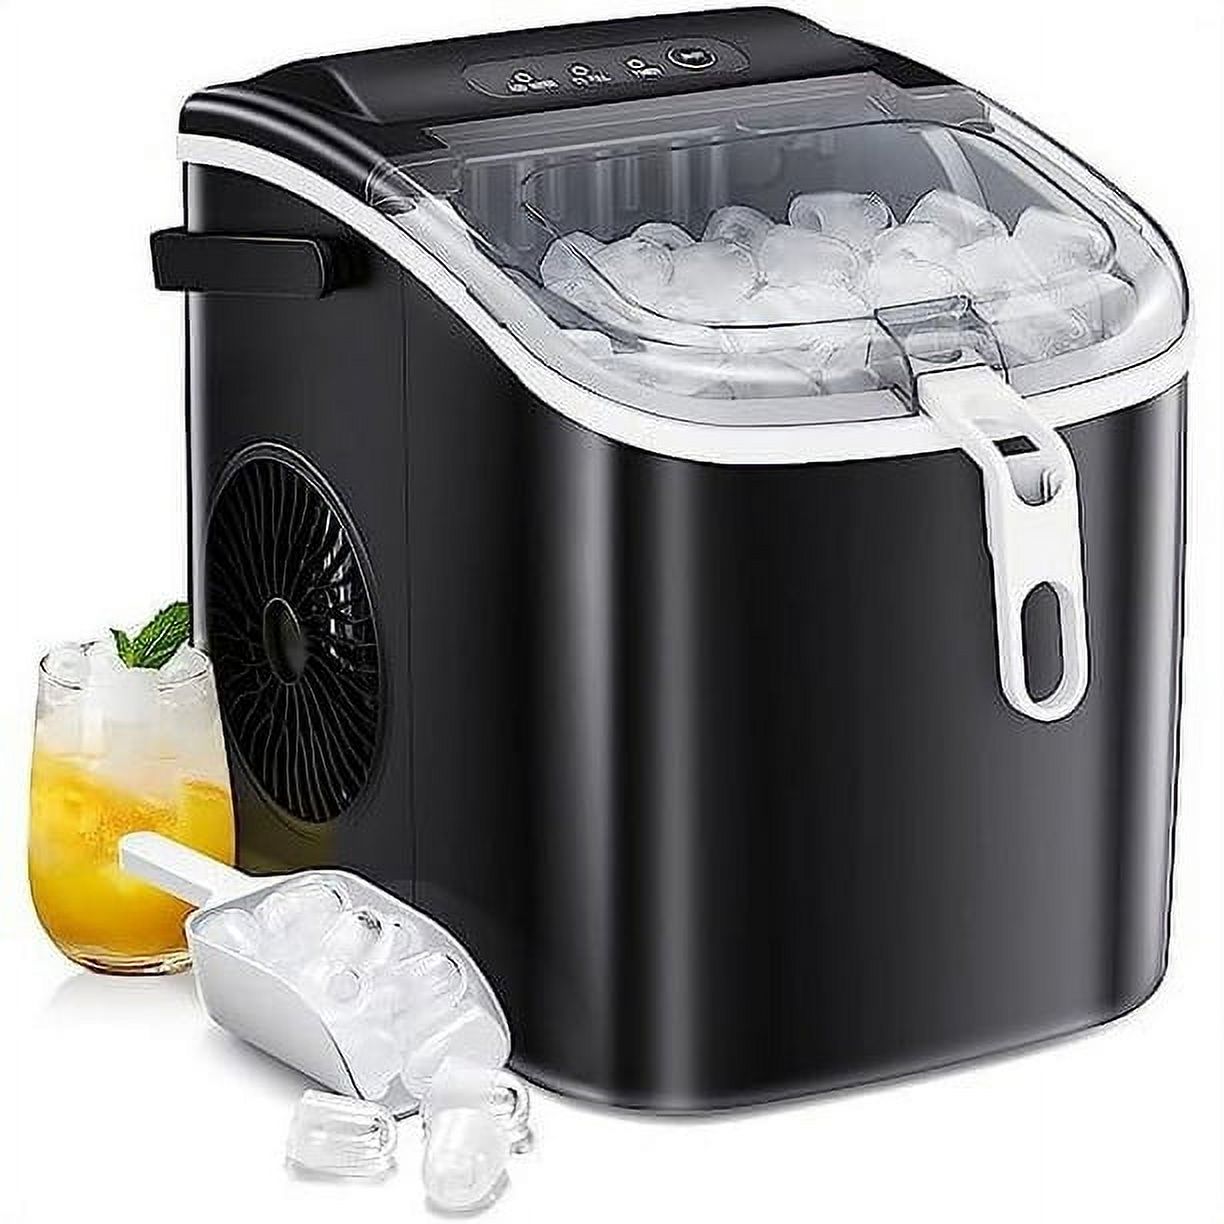 KISSAIR Portable Ice Maker Machine with Handle,26Lbs/24H,Bullet-Shaped Ice Cubes, Black - image 1 of 7